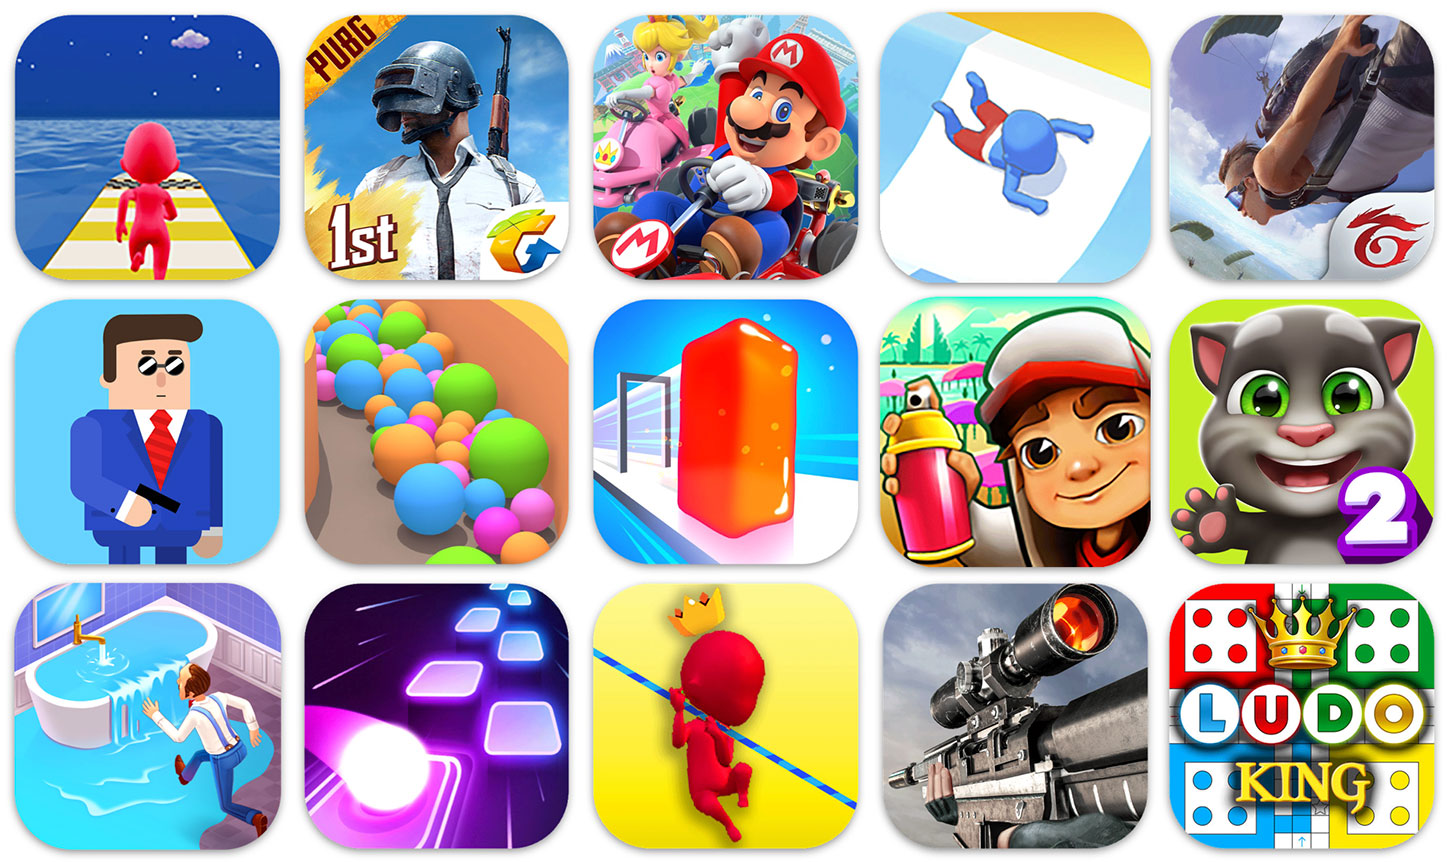 Top Mobile Games Worldwide for Q3 2019 by Downloads